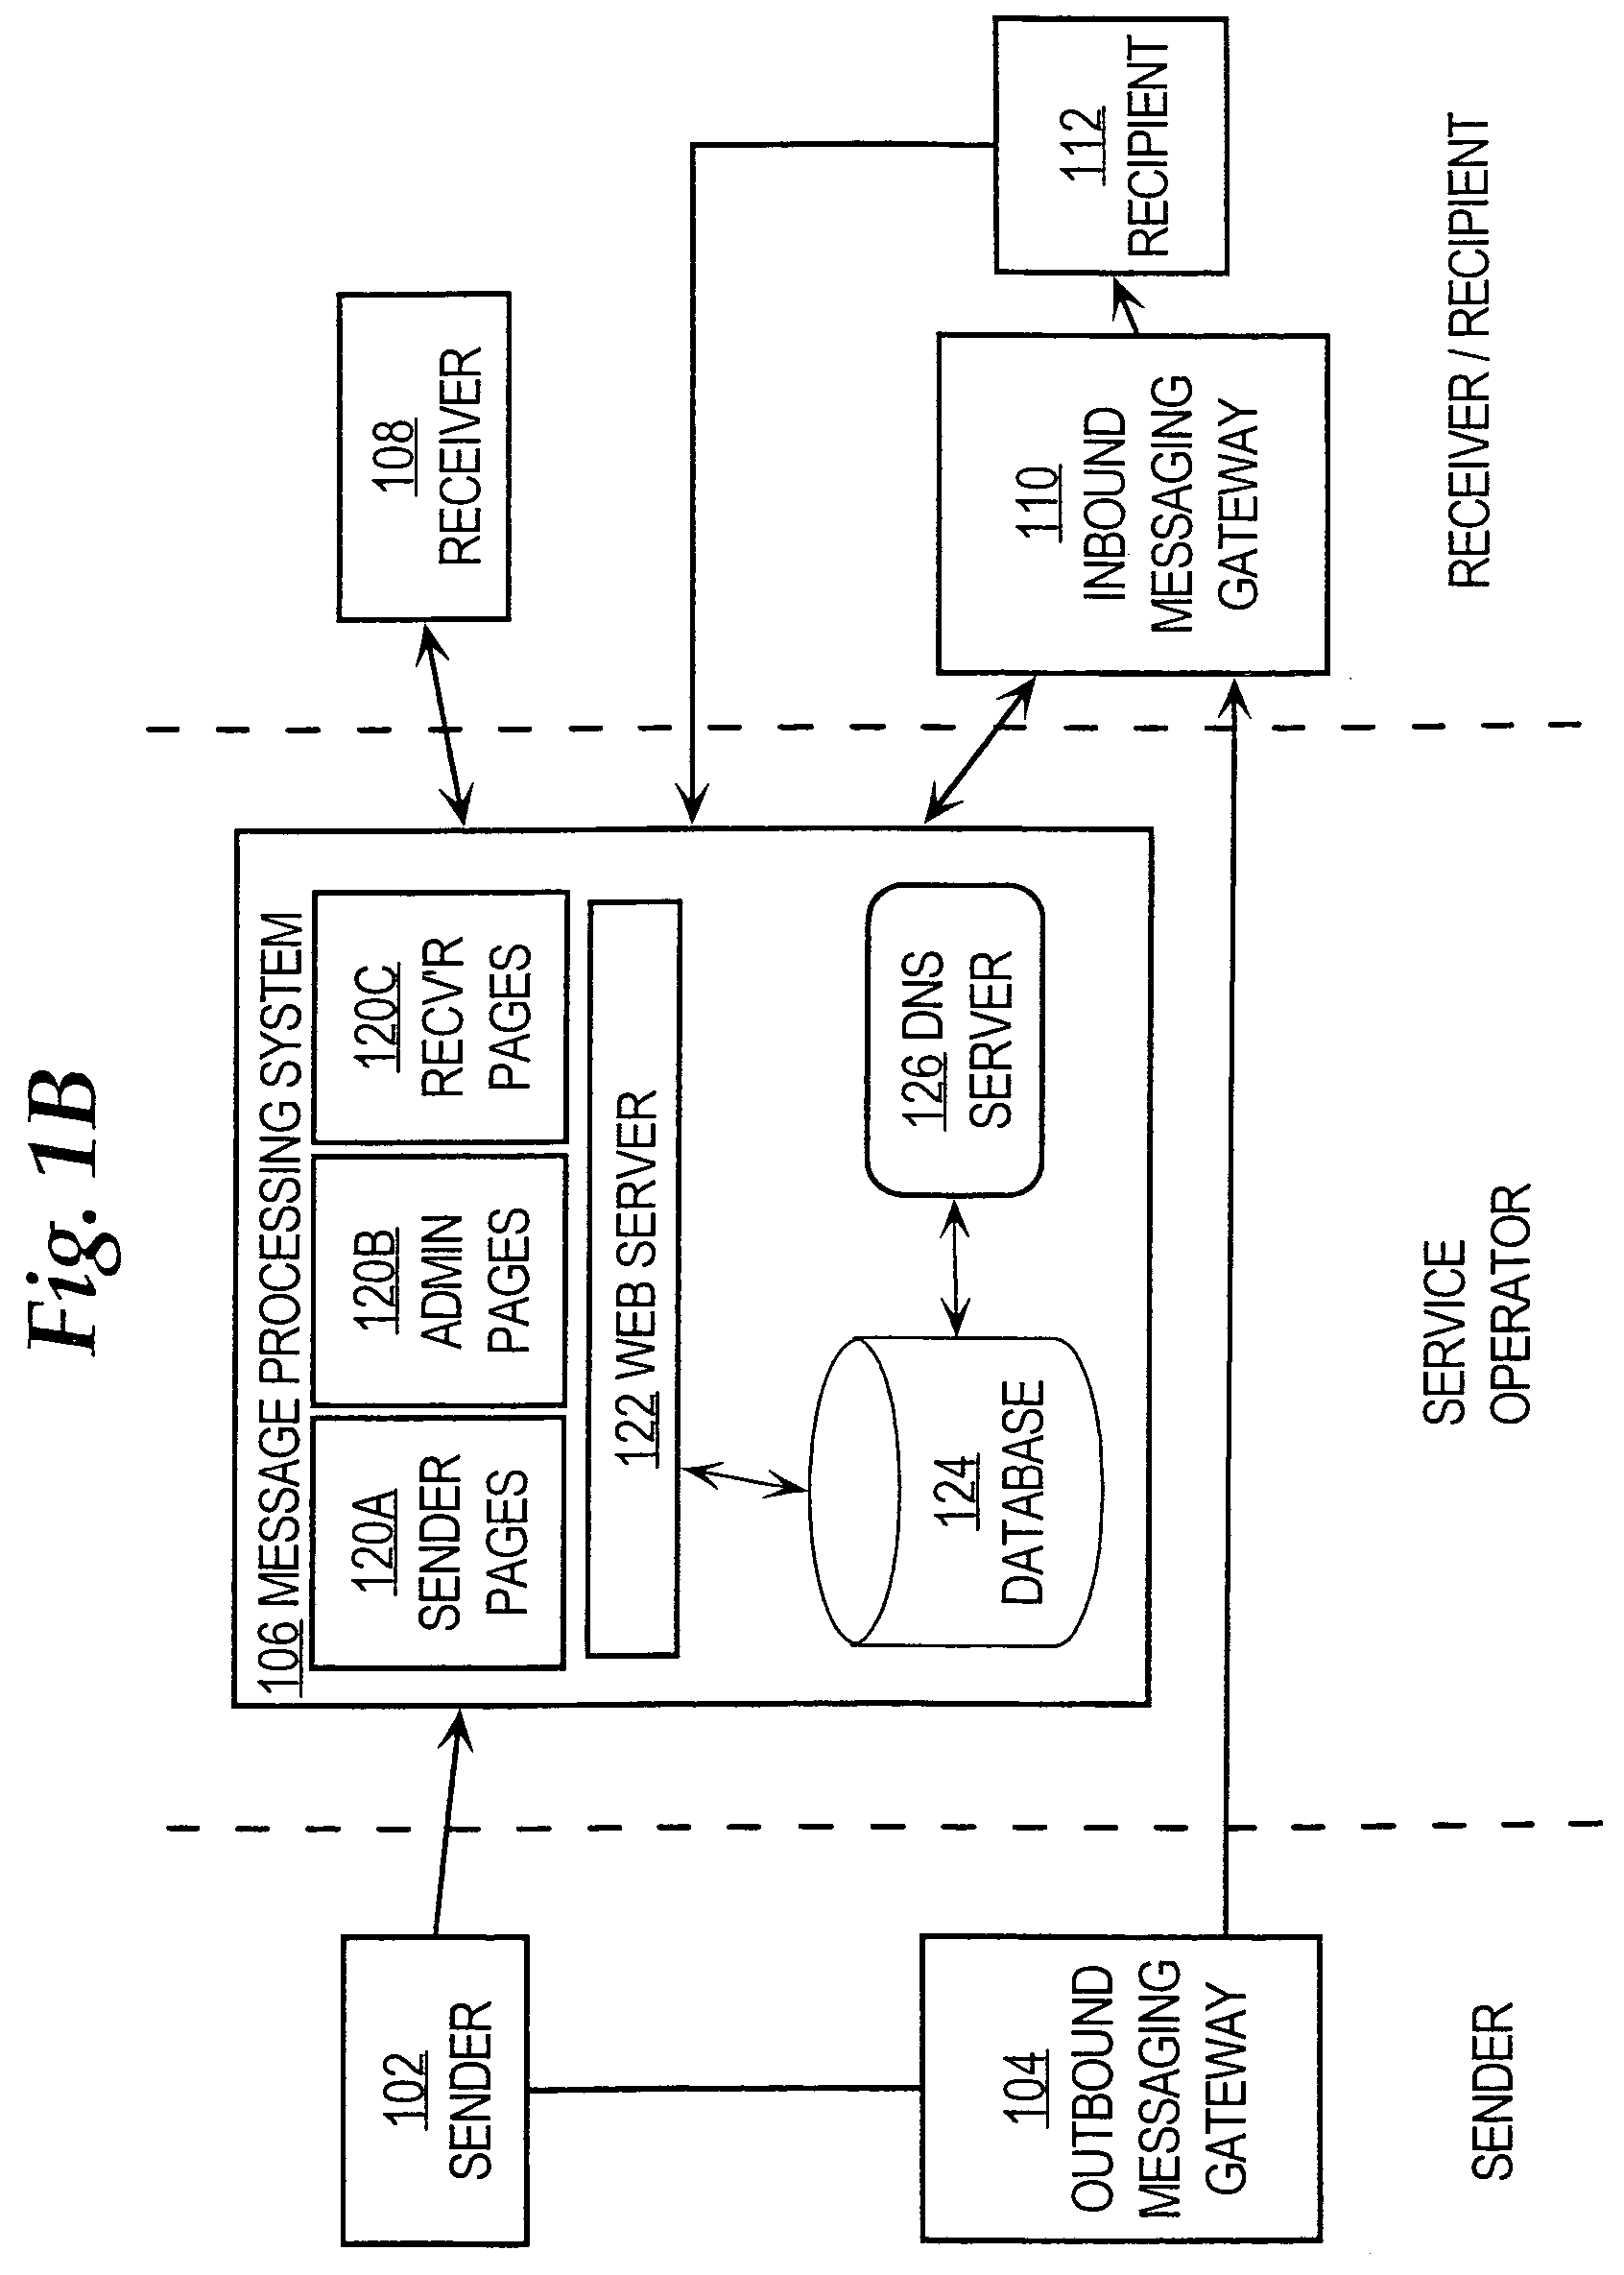 Method of electronic message delivery with penalties for unsolicited messages